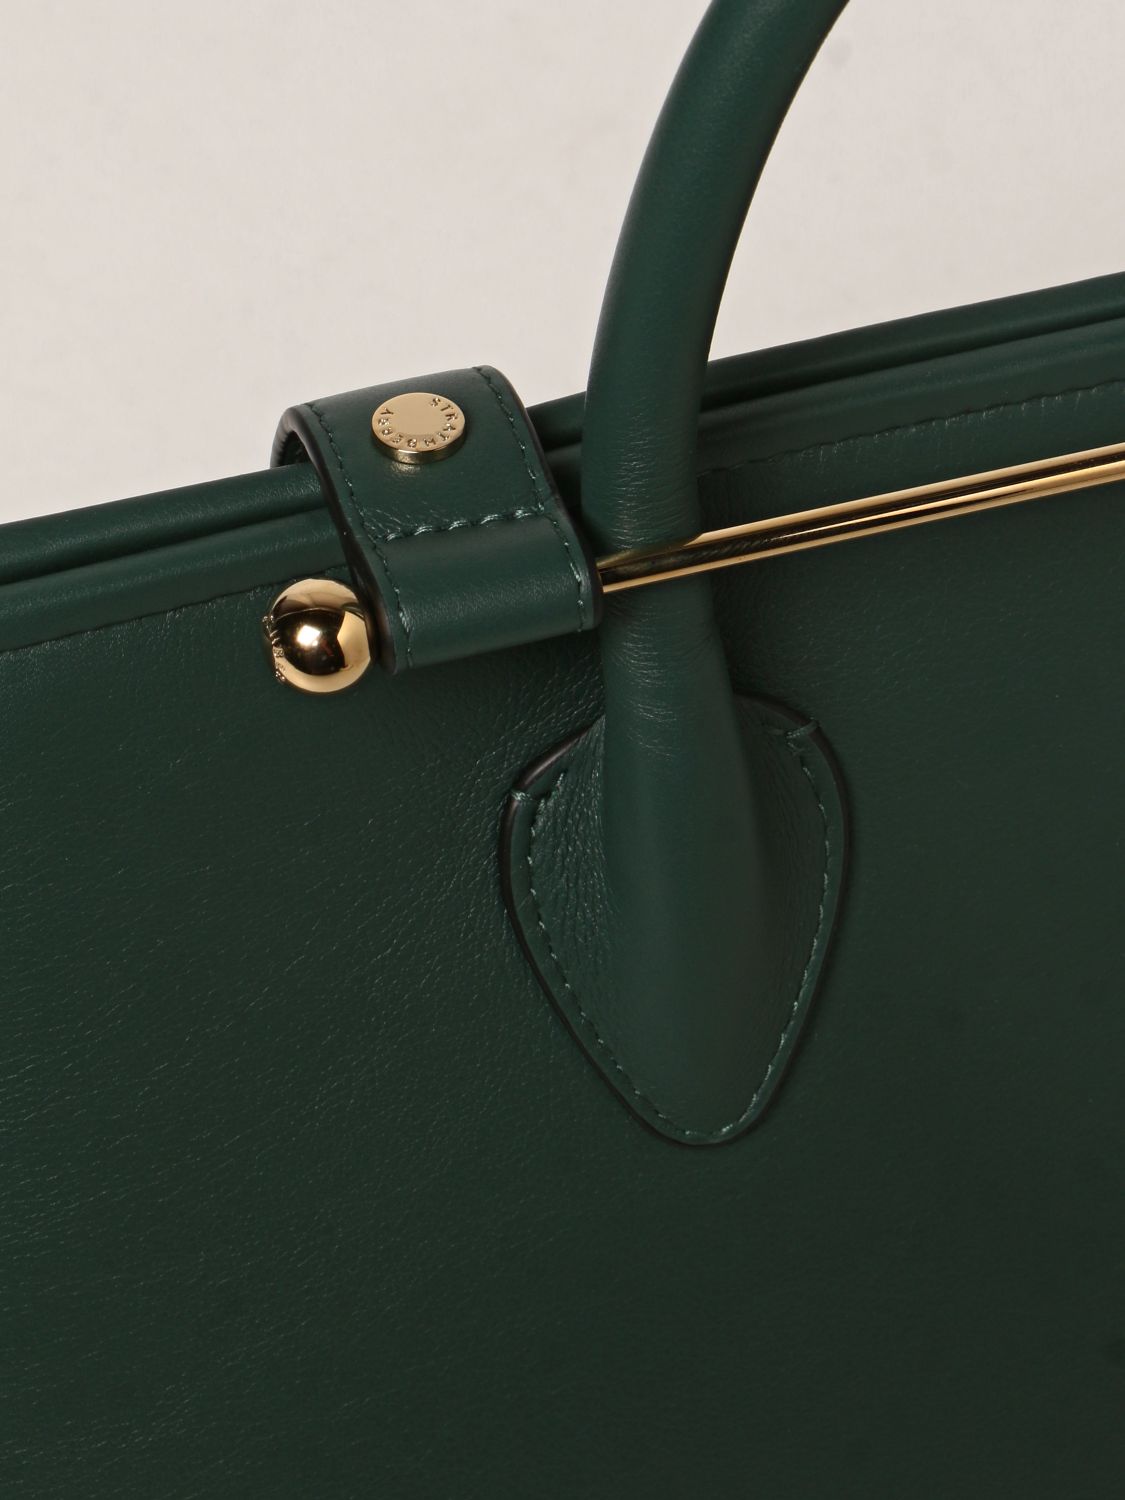 STRATHBERRY: leather midi tote bag - Green  Strathberry tote bags  20194-100-125-900-w online at